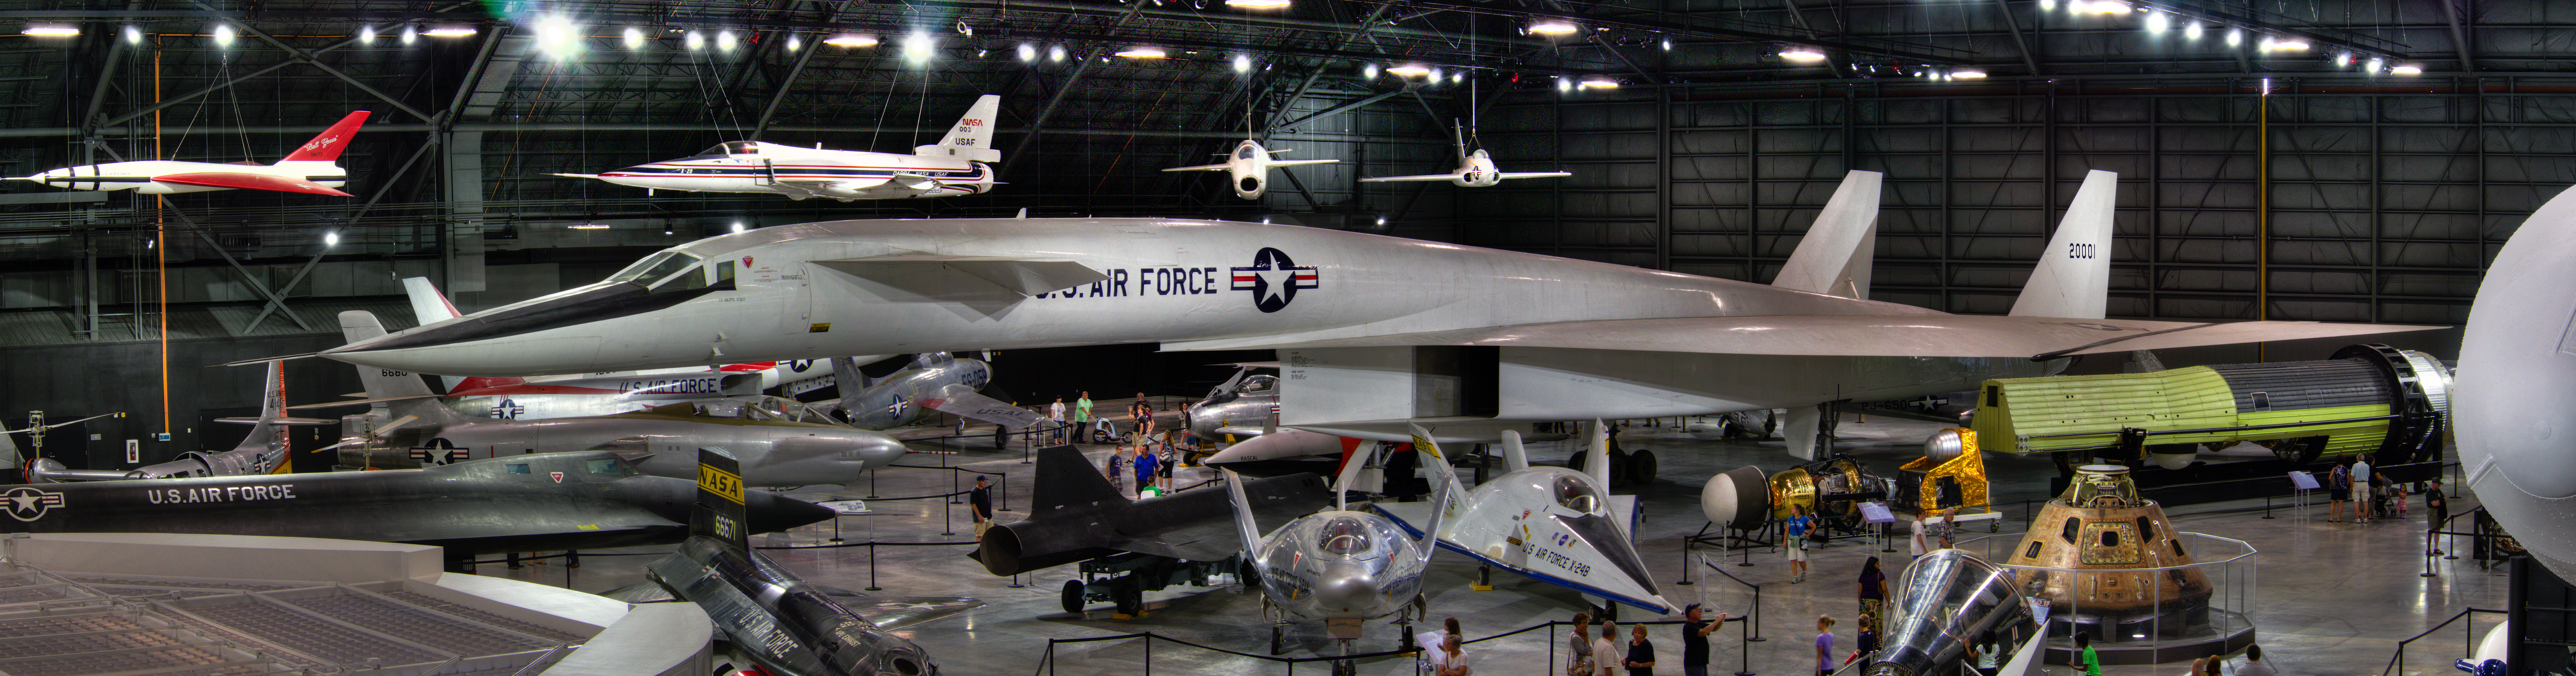 North_American_XB-70_Valkyrie_at_Wright-Patterson_USAF_Museum_-_June_2016.jpg